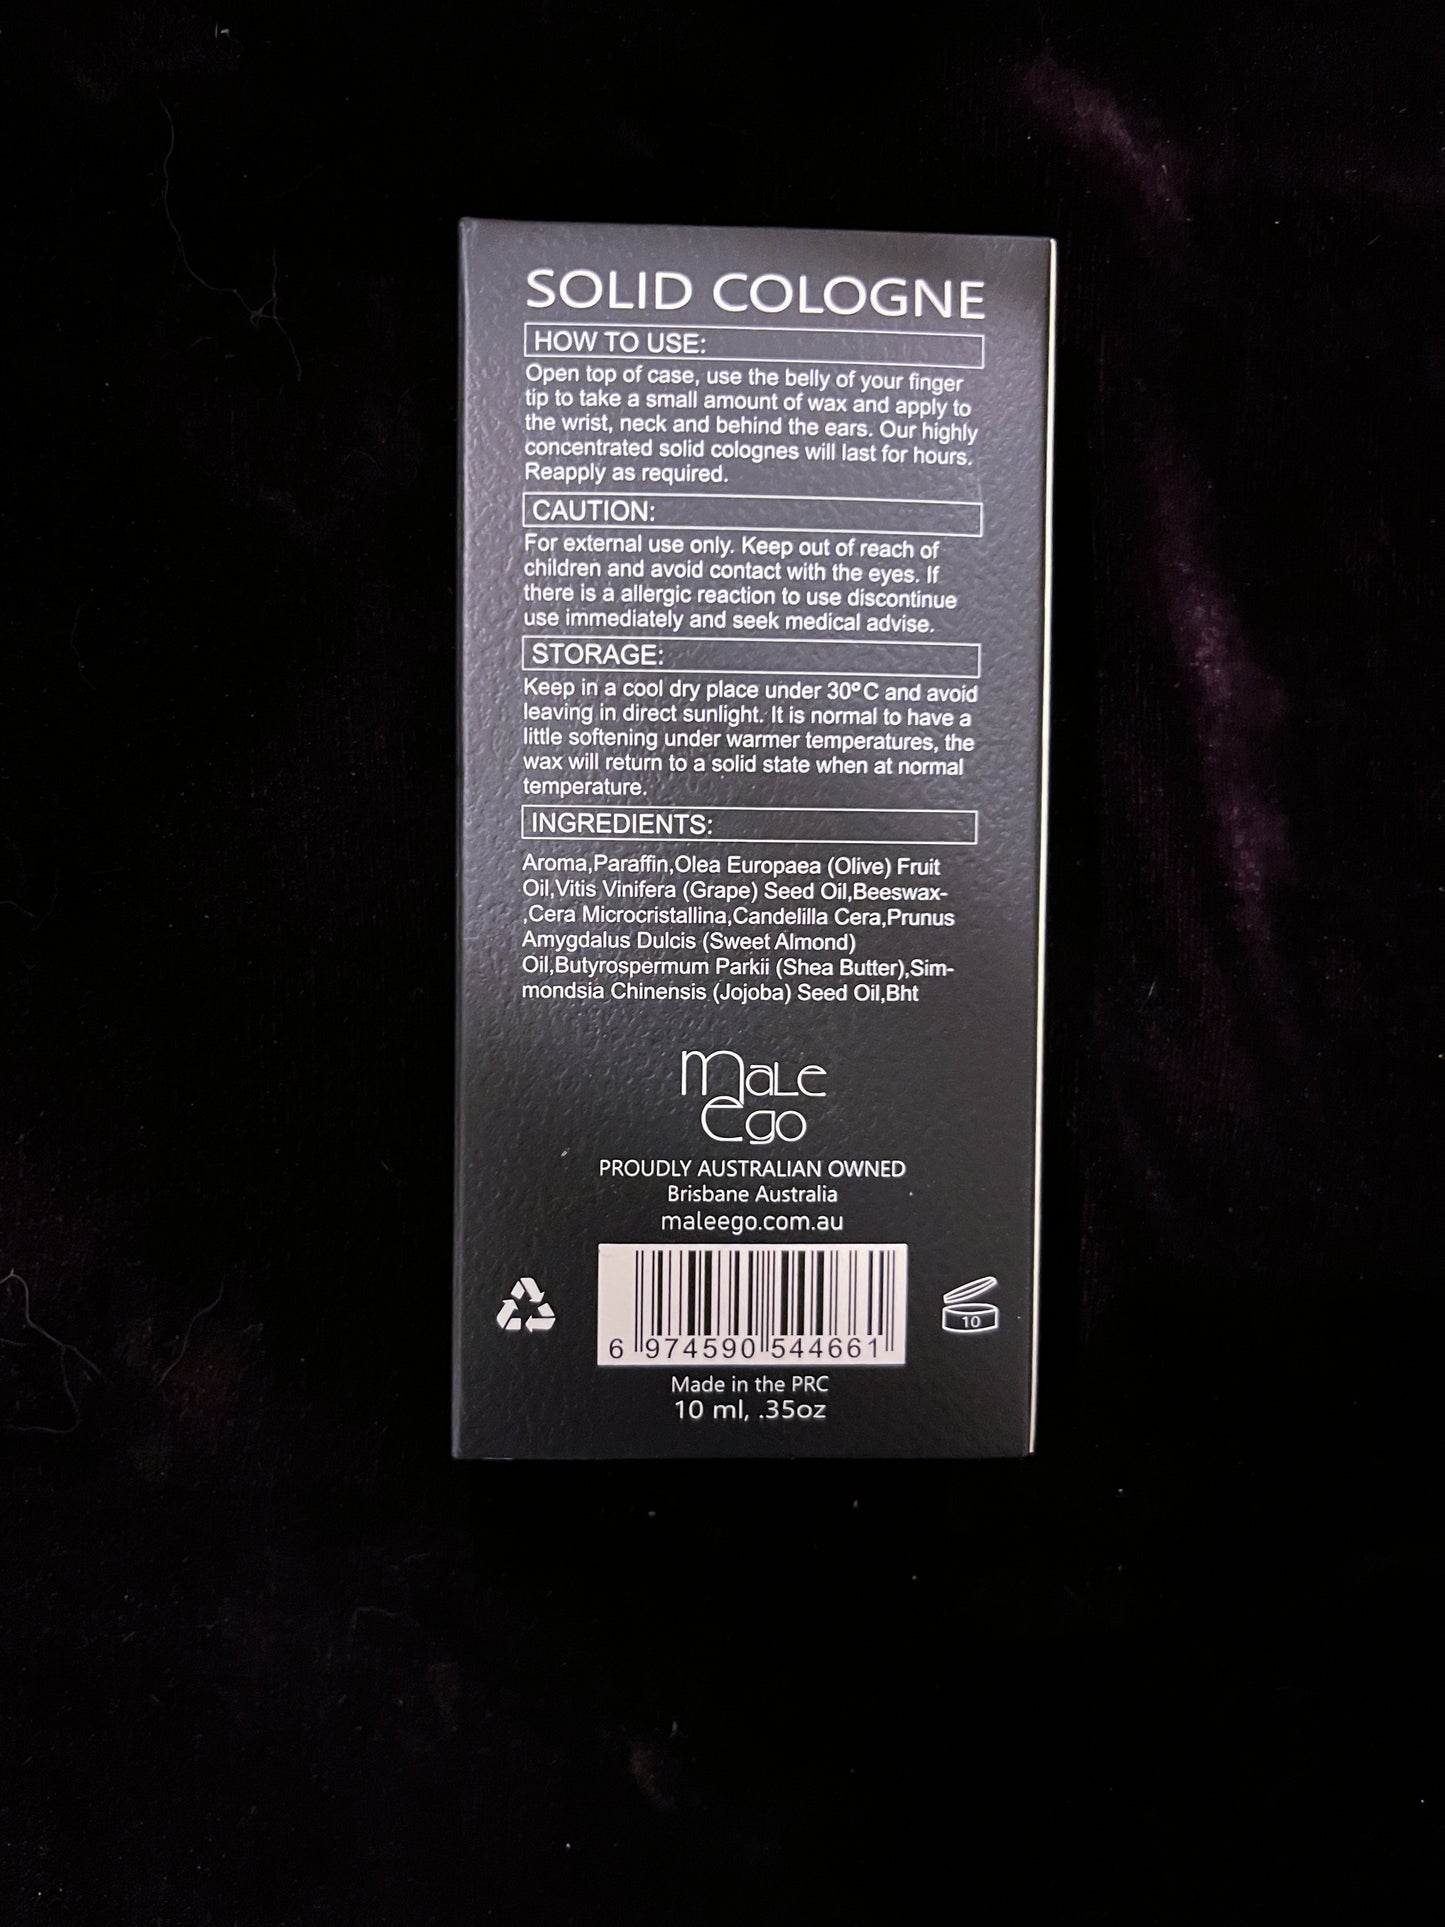 Homage - Solid Cologne